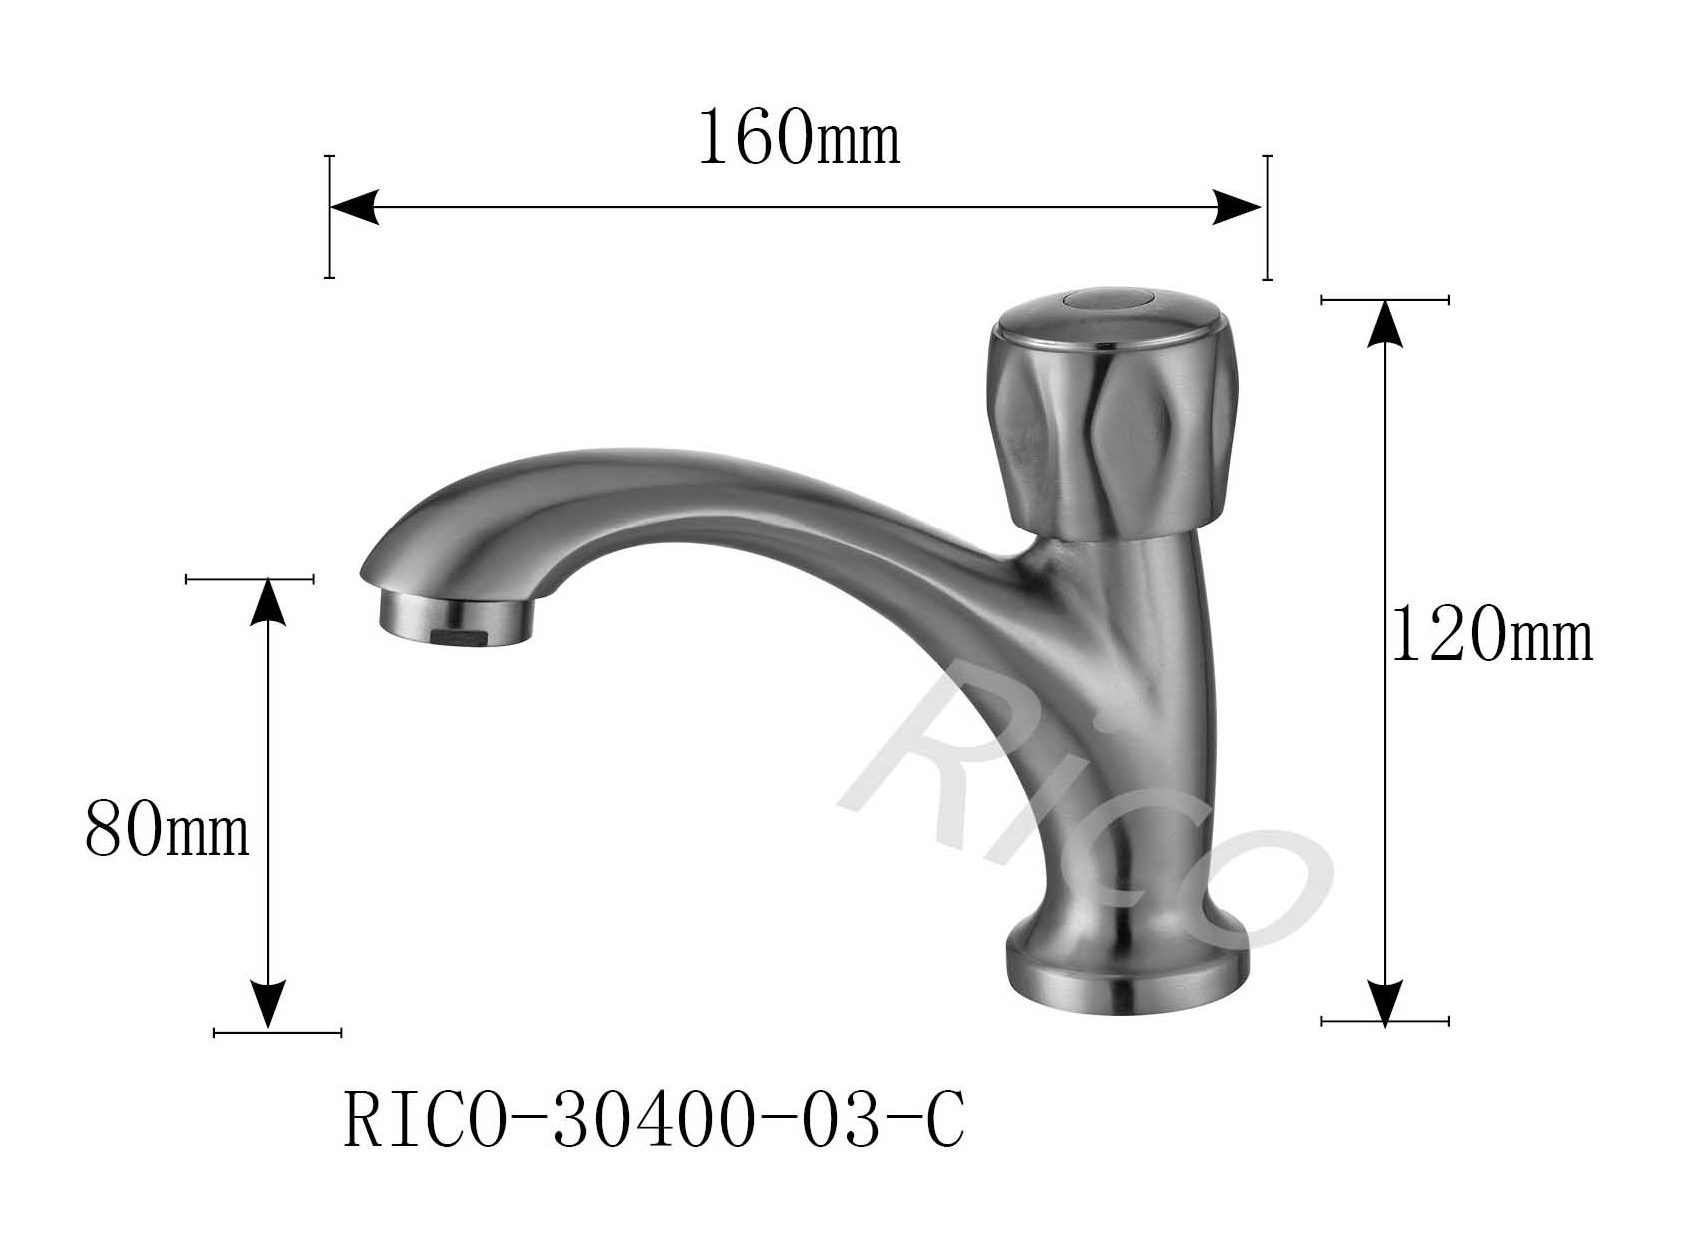 Rico : Stainless Steel Basin Cold Tap – RICO-30400-03-C